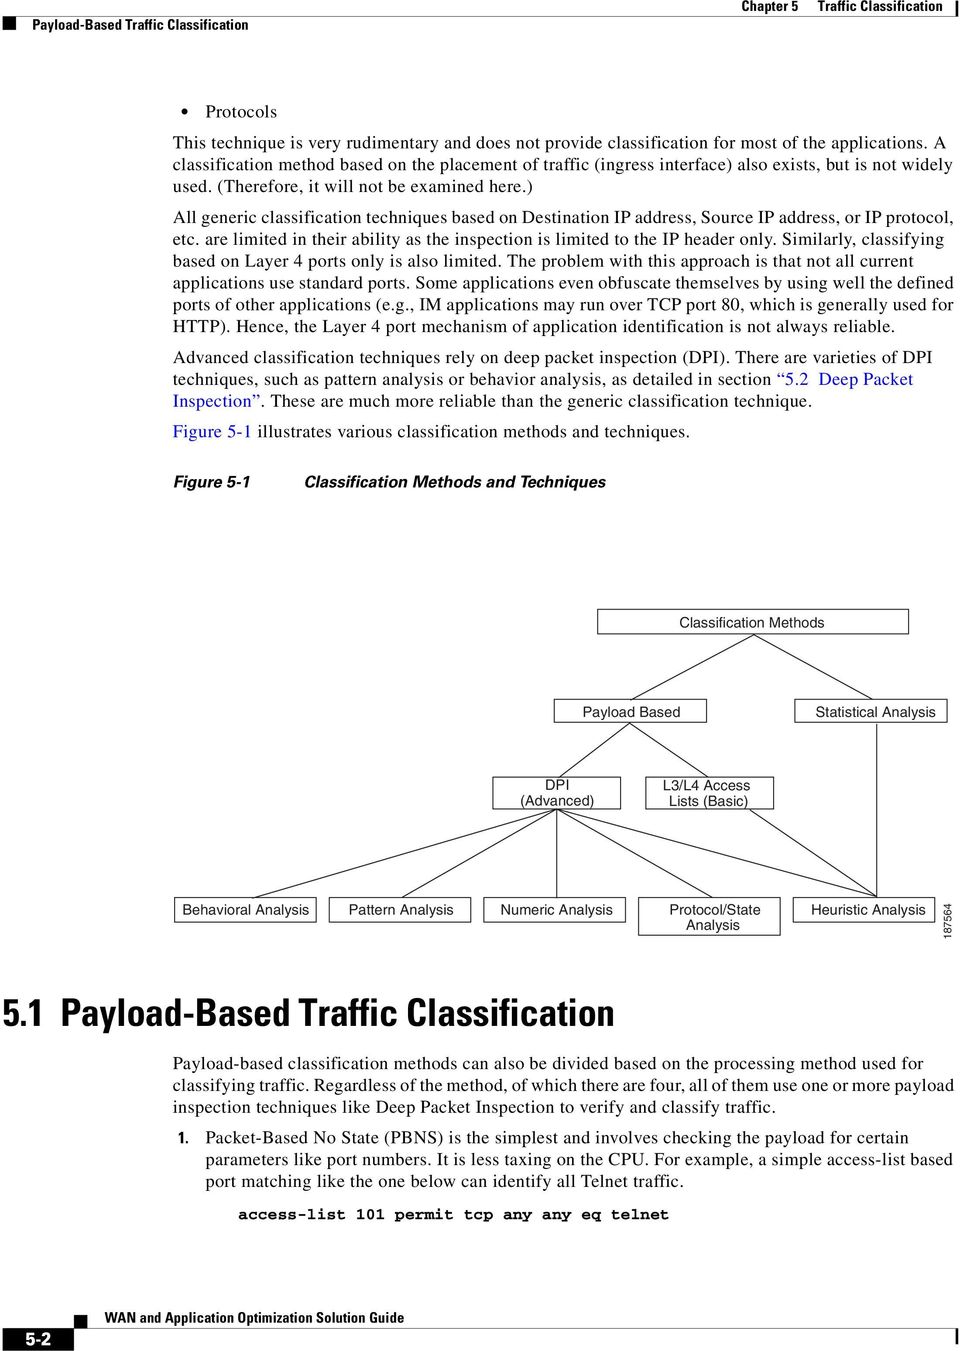 ) All generic classification techniques based on Destination IP address, Source IP address, or IP protocol, etc. are limited in their ability as the inspection is limited to the IP header only.